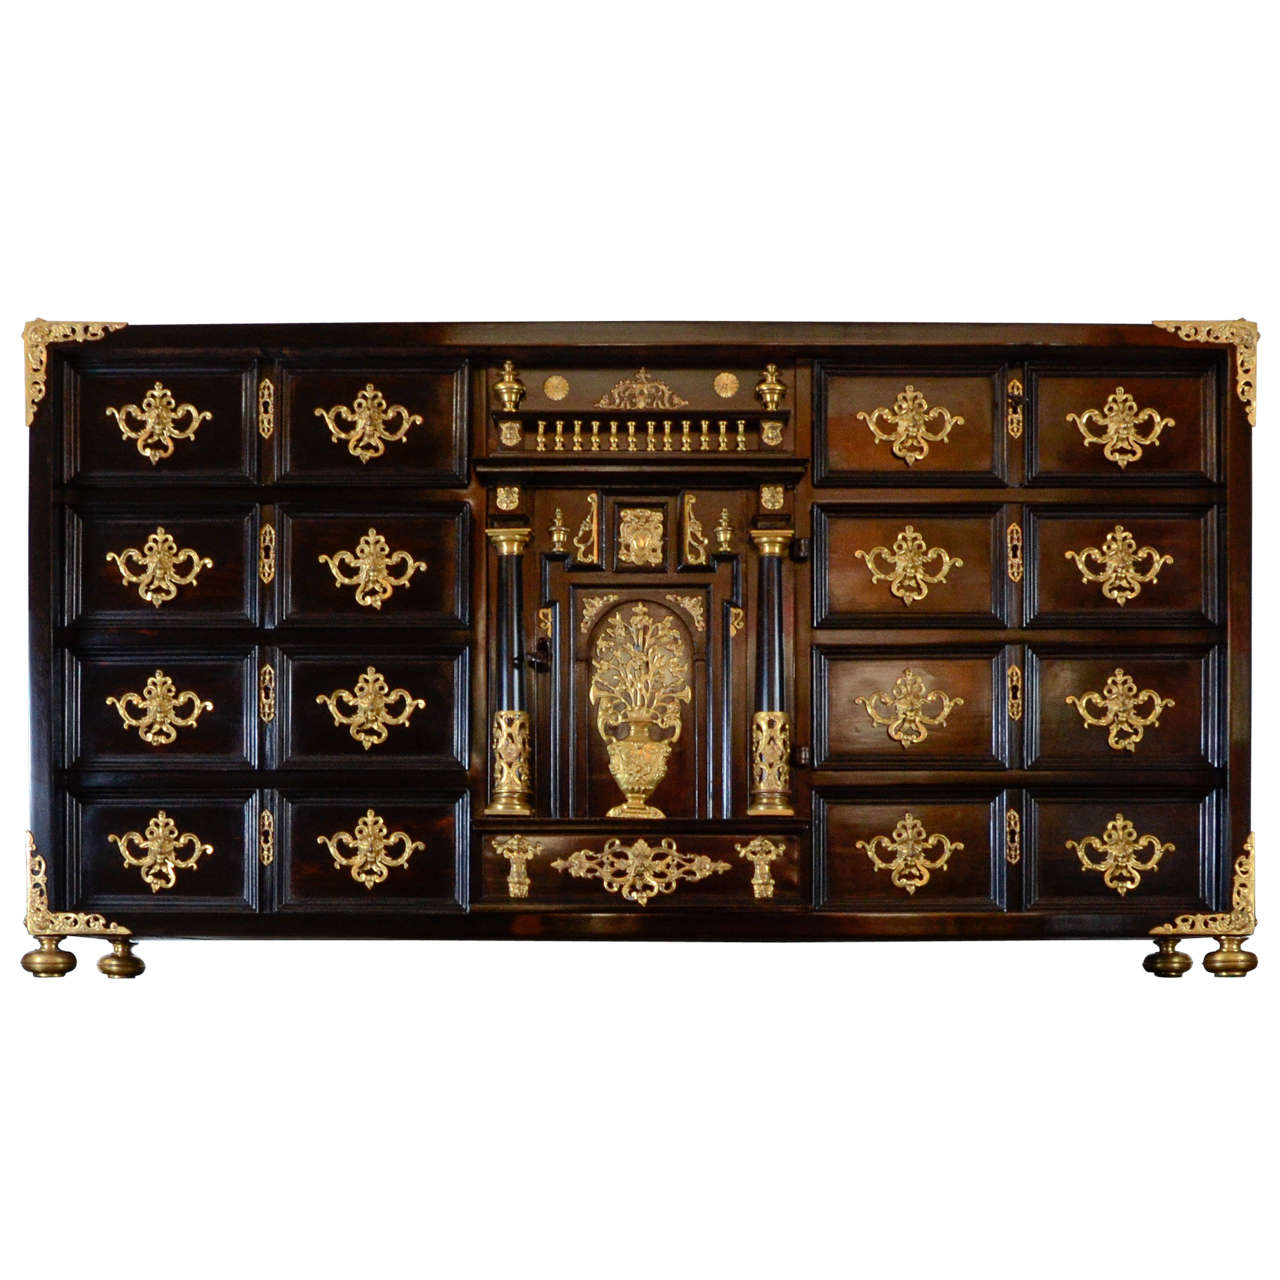 An italian 17th century Cabinet For Sale